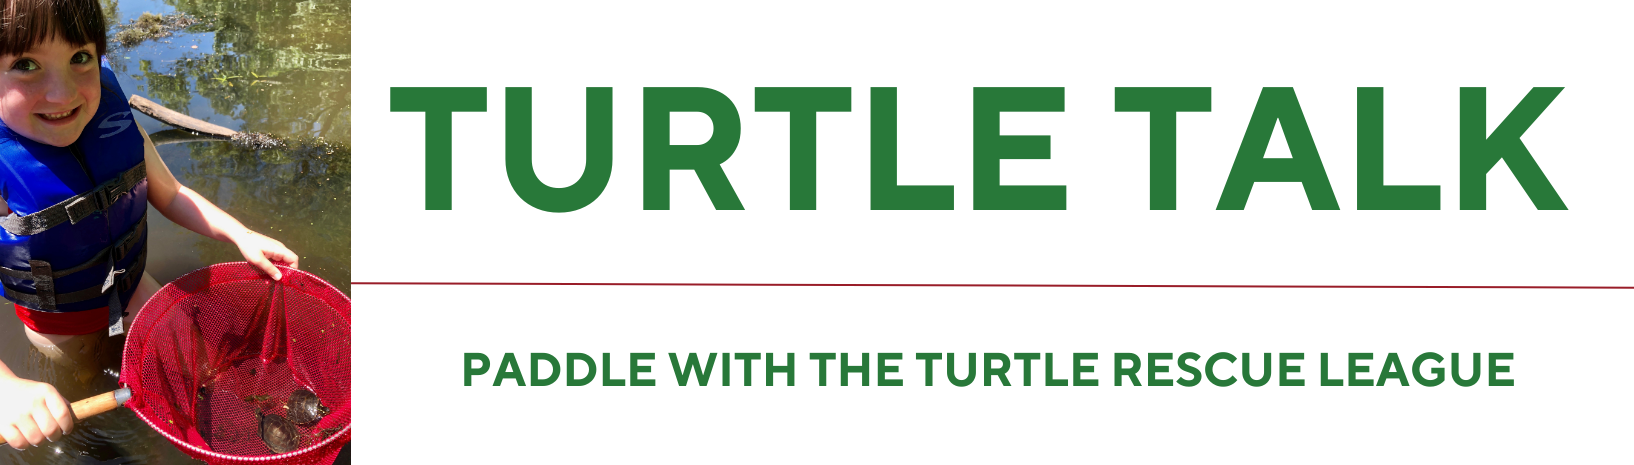 Paddle A Thon Turtle Talk Paddle Ipswich River Watershed Association 8893